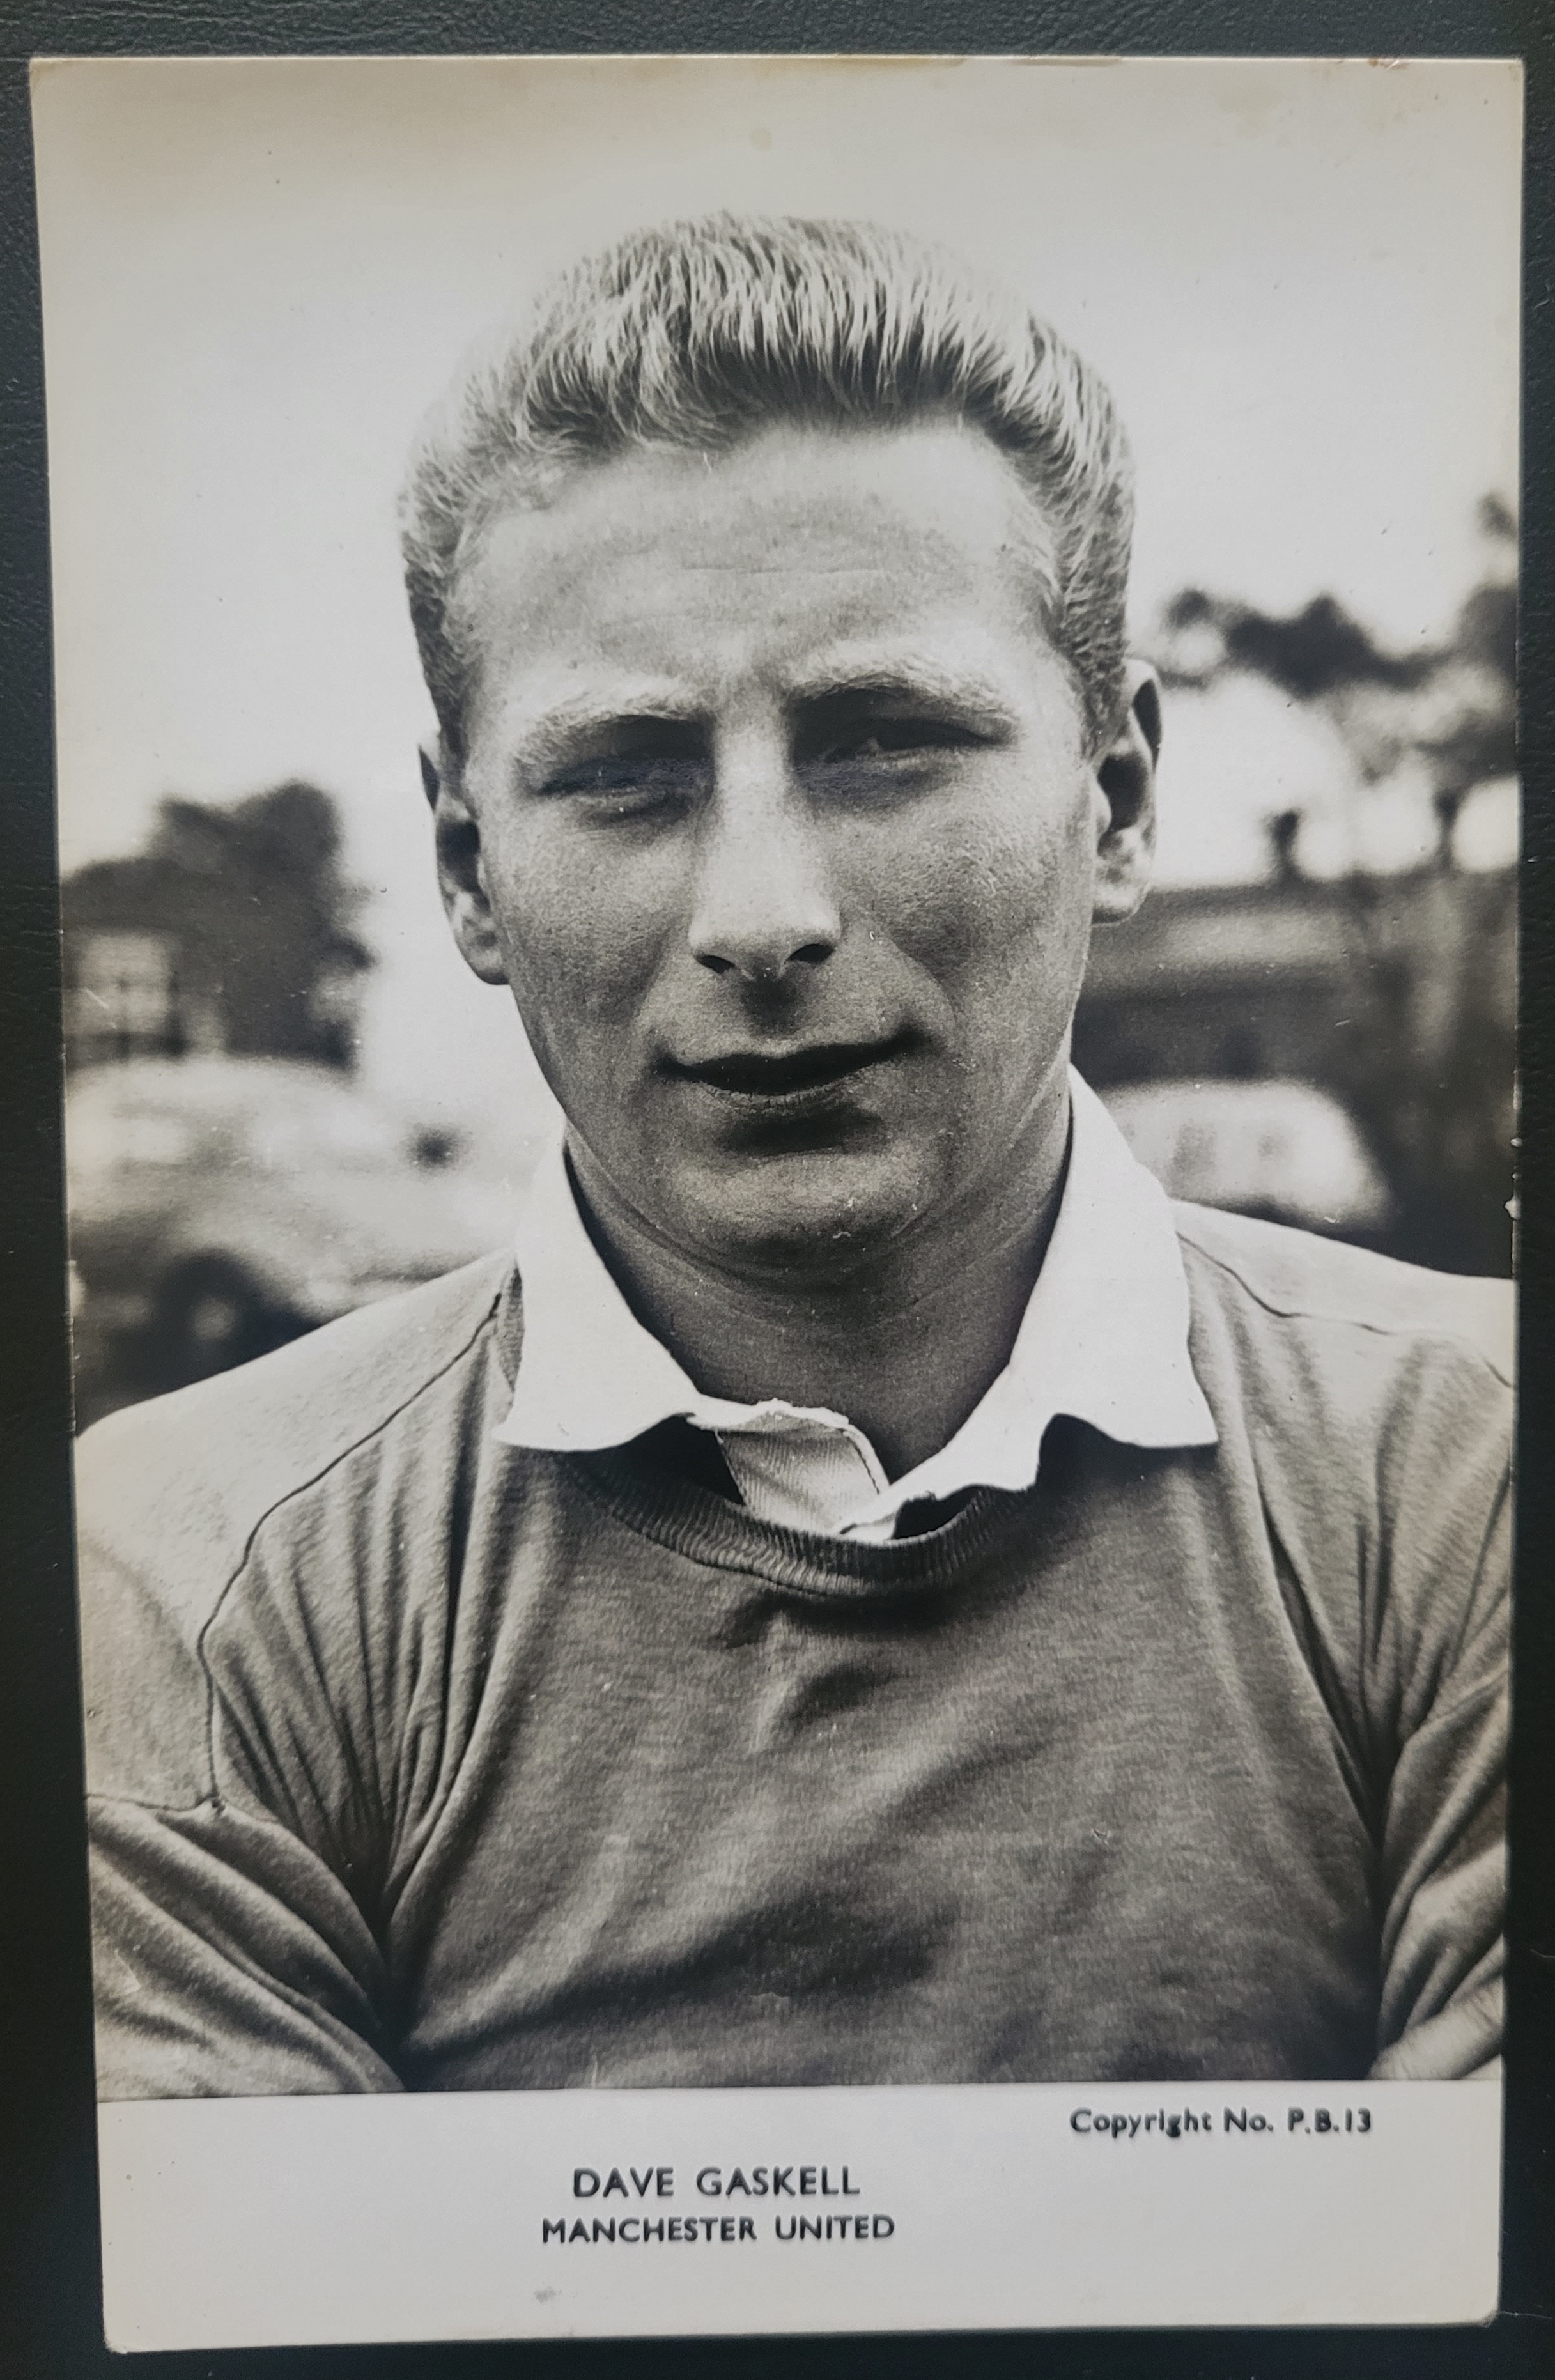 MANCHESTER UNITED EARLY 1960'S DAVE GASKELL POSTCARD